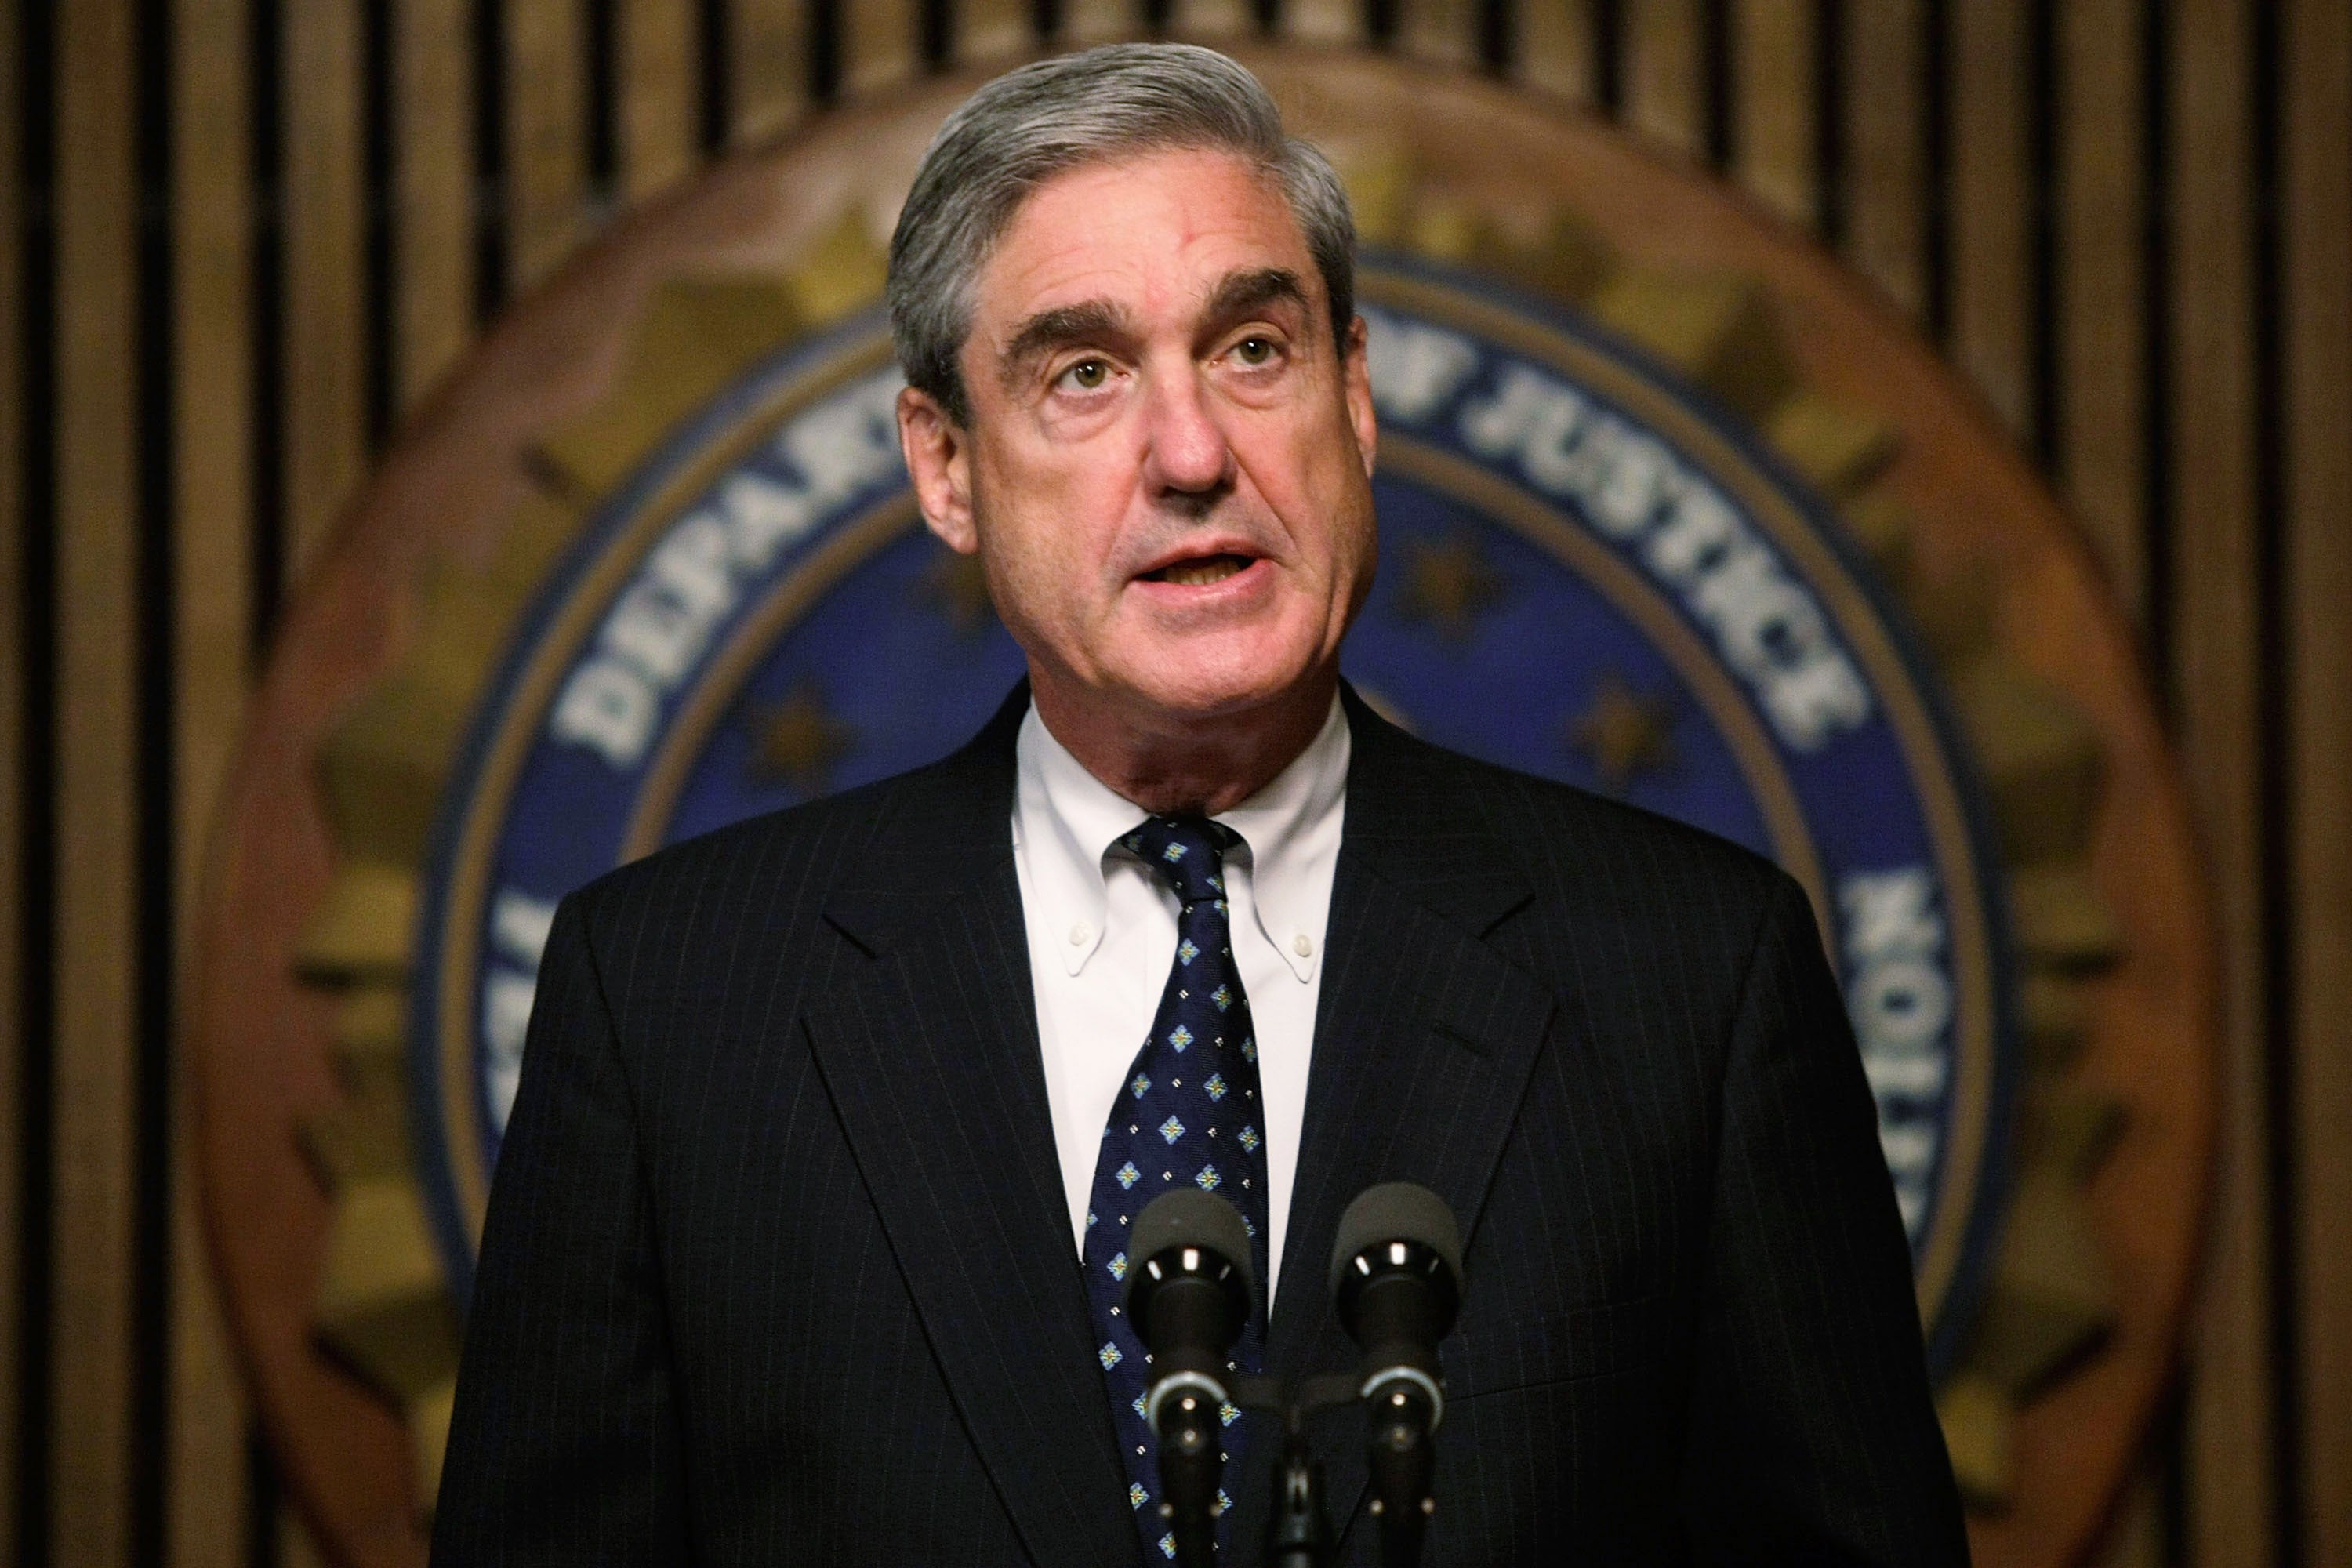 Opinion: Black Voters Should Be Concerned About The Mueller Report, Too